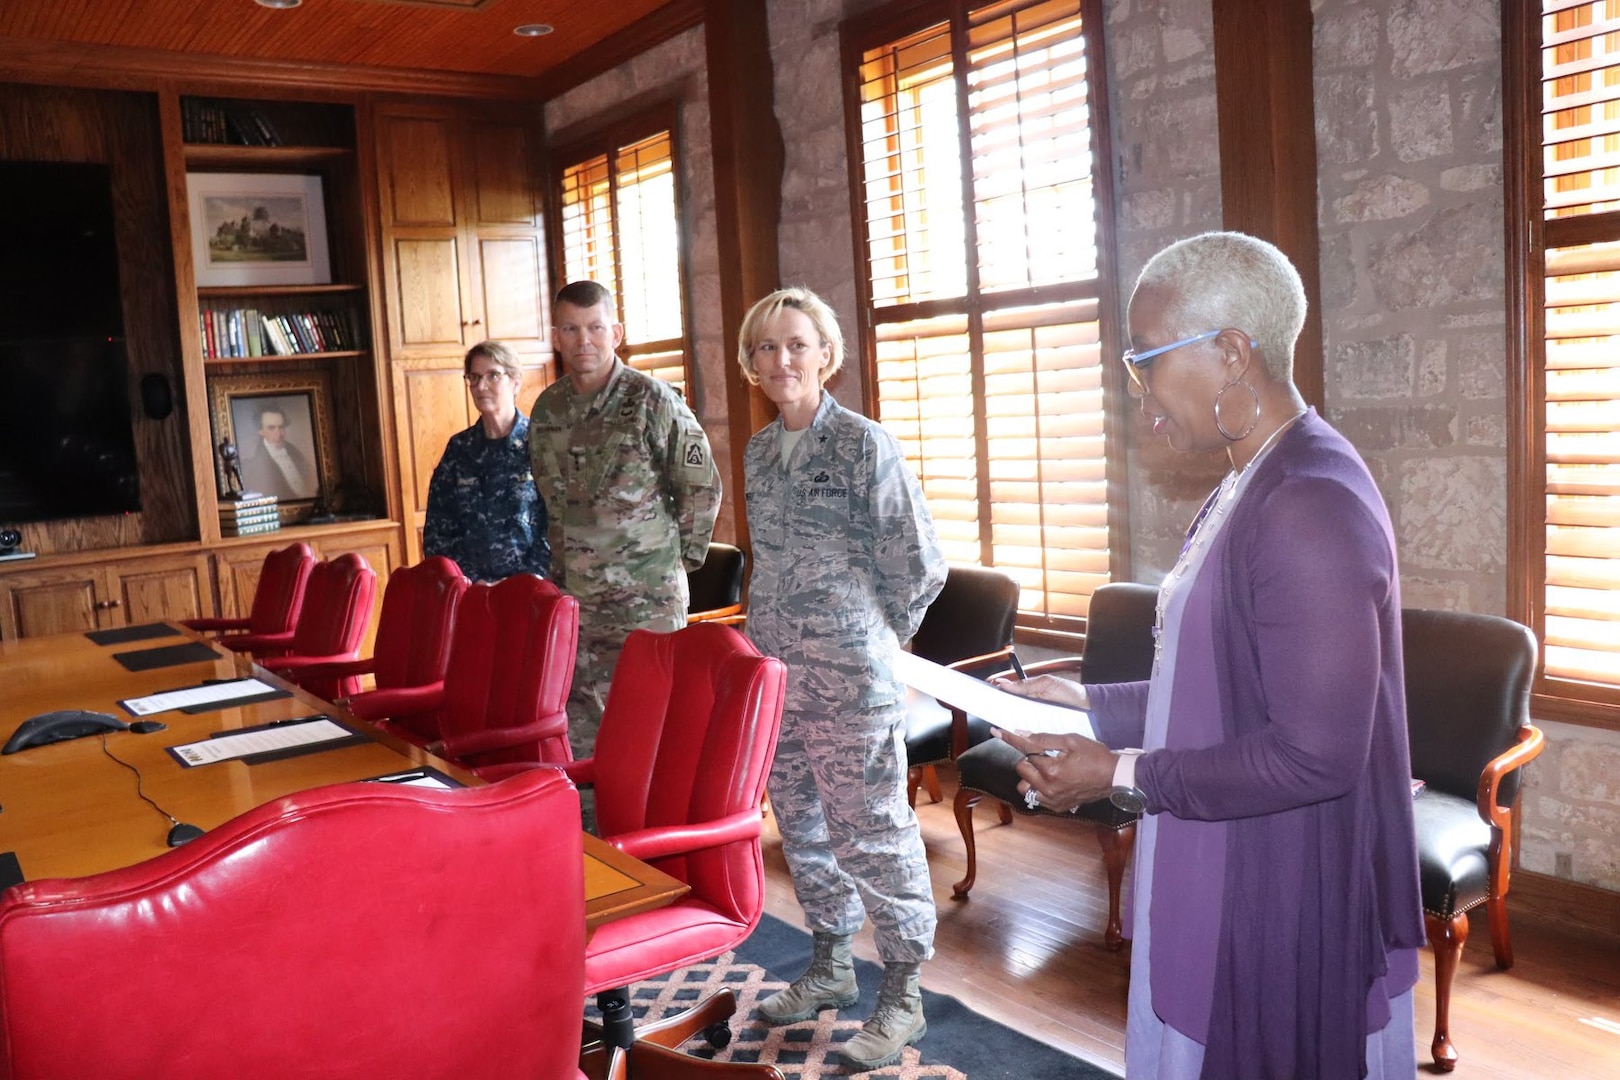 (From left) Rear Adm. Rebecca McCormick-Boyle, commander, Navy Medicine Education, Training and Logistics Command; Lt. Gen. Jeffrey Buchanan, commanding general, U.S. Army North (Fifth Army); and Brig. Gen. Heather Pringle, commander, 502nd Air Base Wing and Joint Base San Antonio listen as Nina Hightower reads the proclamation for the Month of the Military Child April 12. Students, local educators and representatives from the Fort Sam Houston and Lackland Independent School Districts were in attendance to recognize and honor the commitment, contributions and sacrifices children and youth make to the nation.